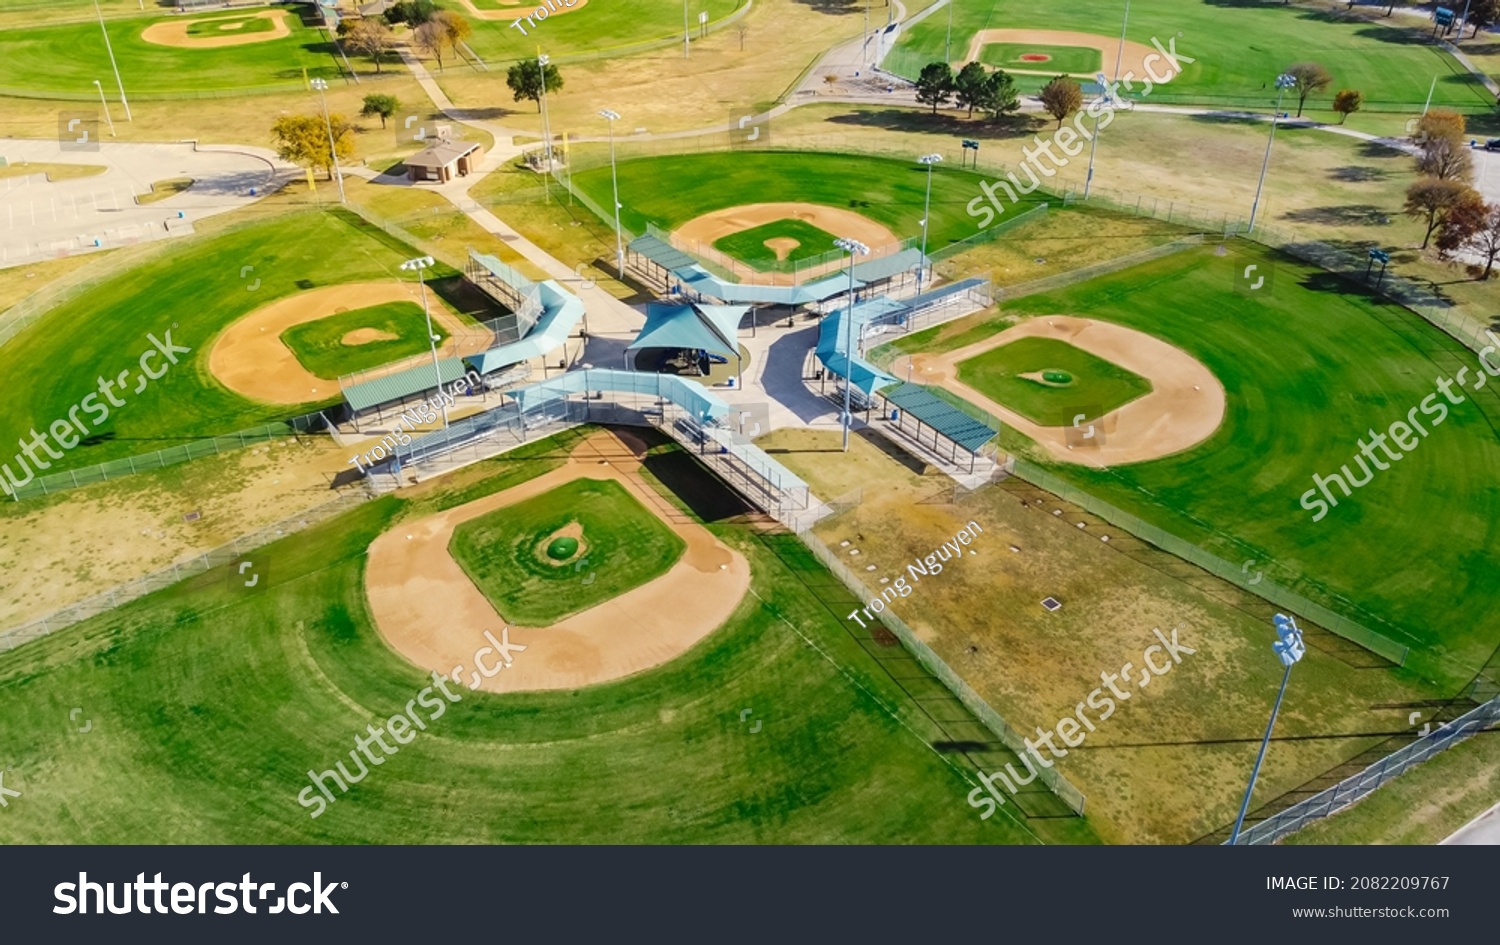 Aerial view huge baseballsoftball complex with natural grass fields, ticket offices, batting cages, pavilion, spectator seating Dallas, TX. Large sport facility venue for practice, tournaments #2082209767